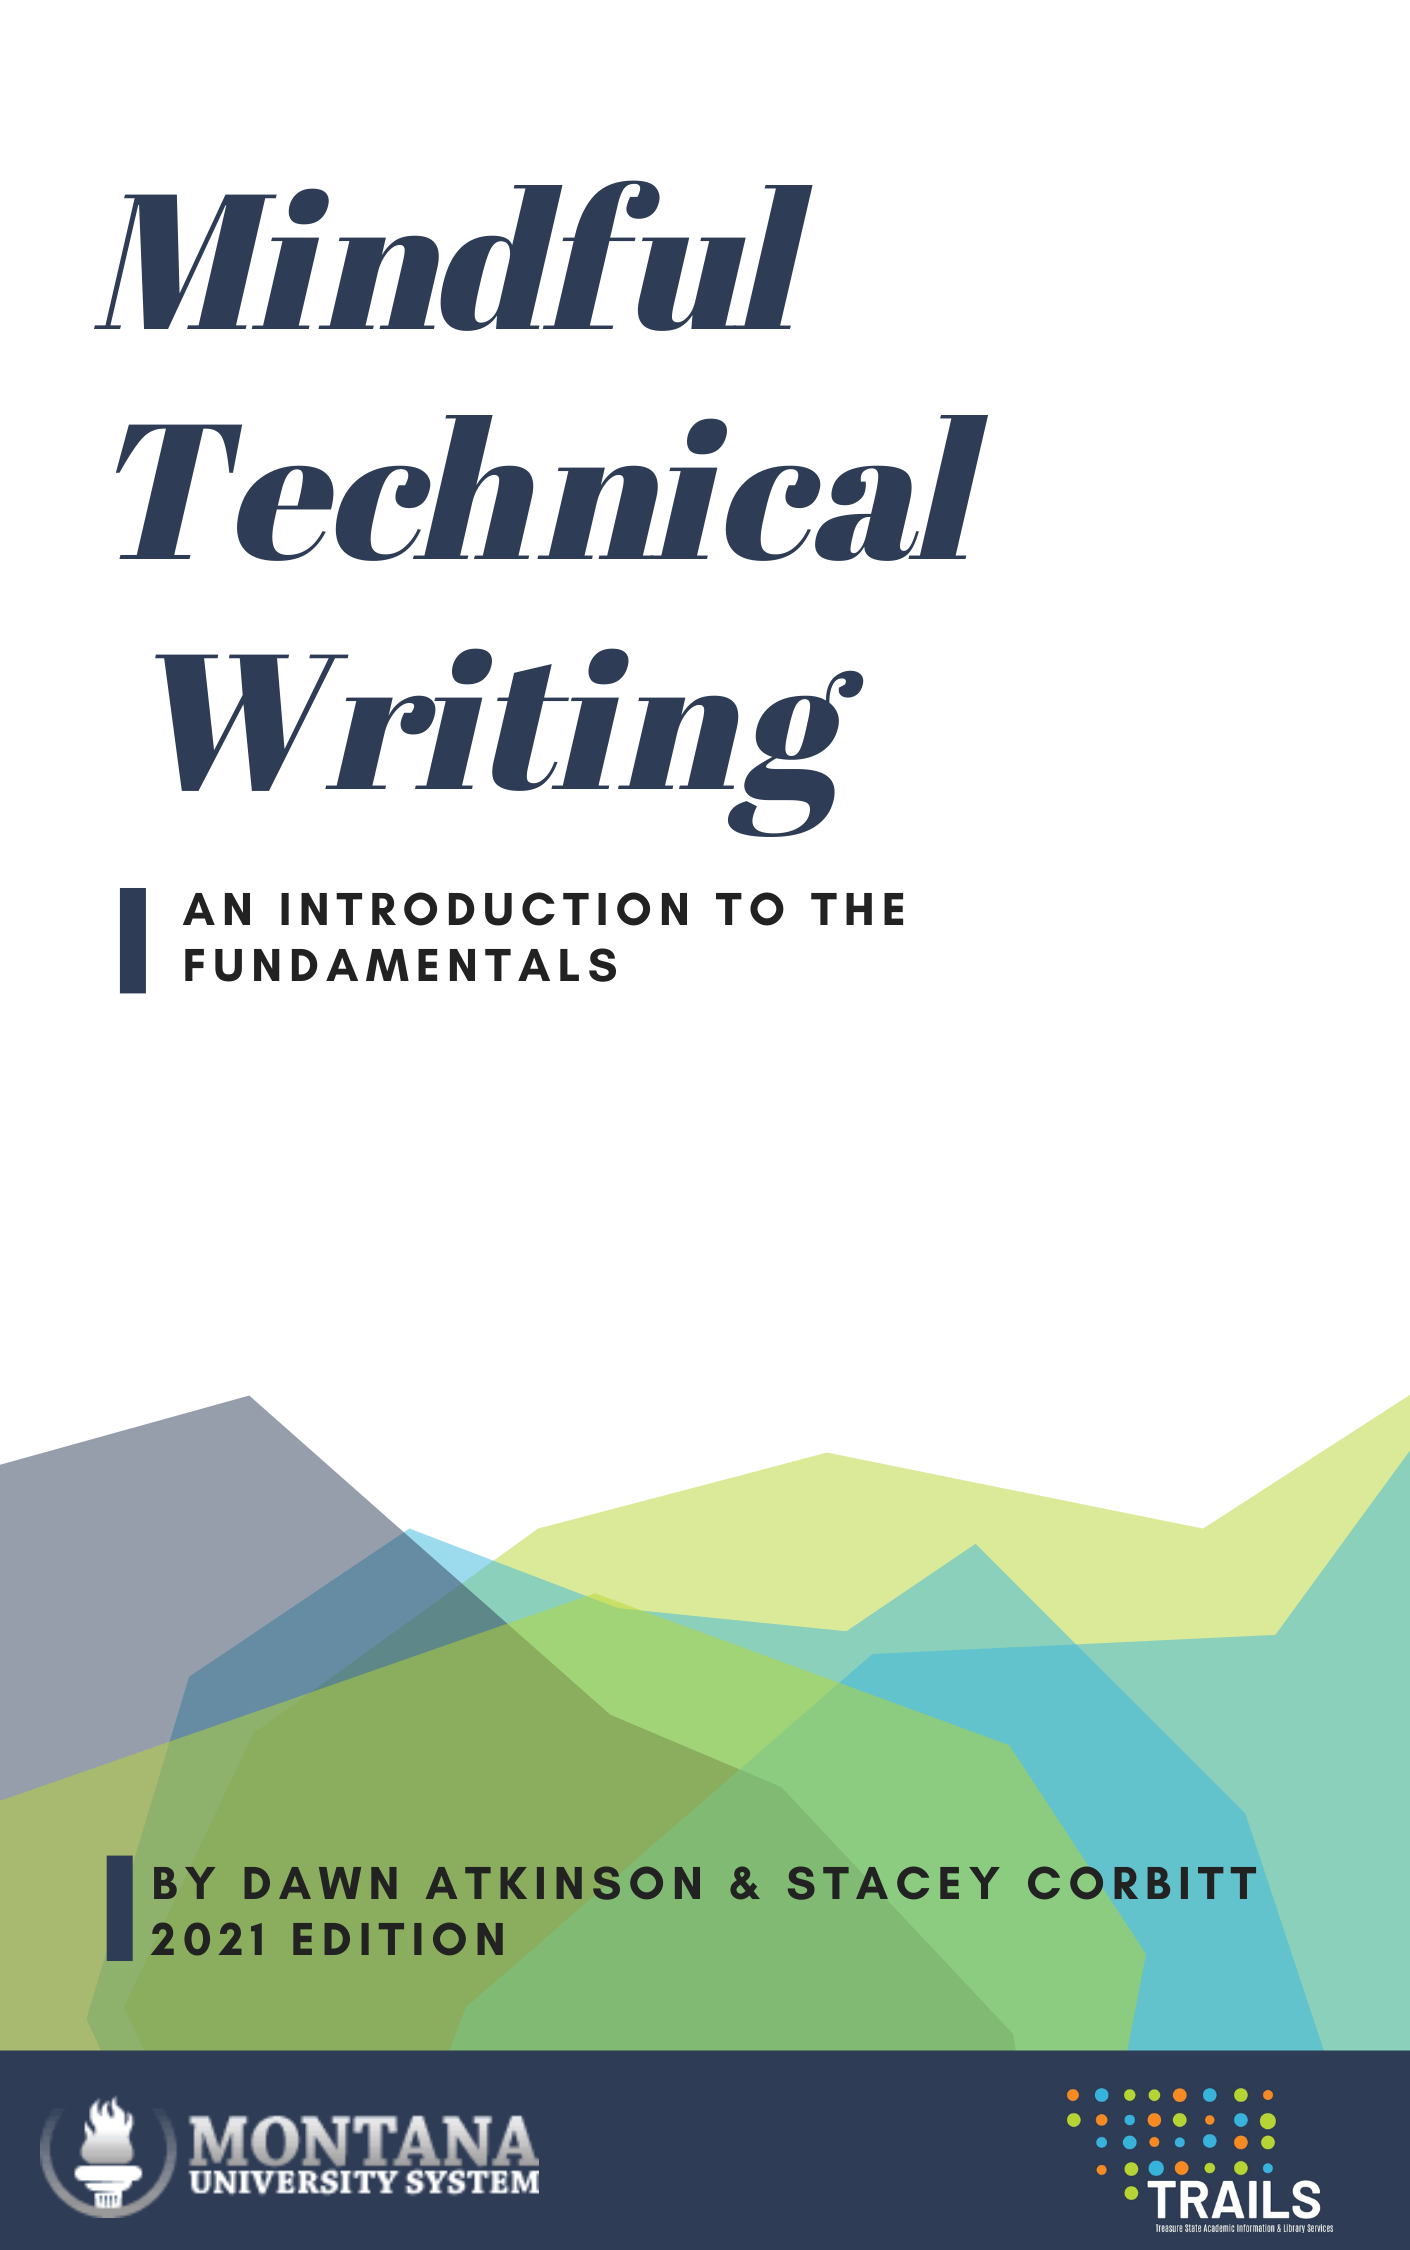 Read more about Mindful Technical Writing: An Introduction to the Fundamentals